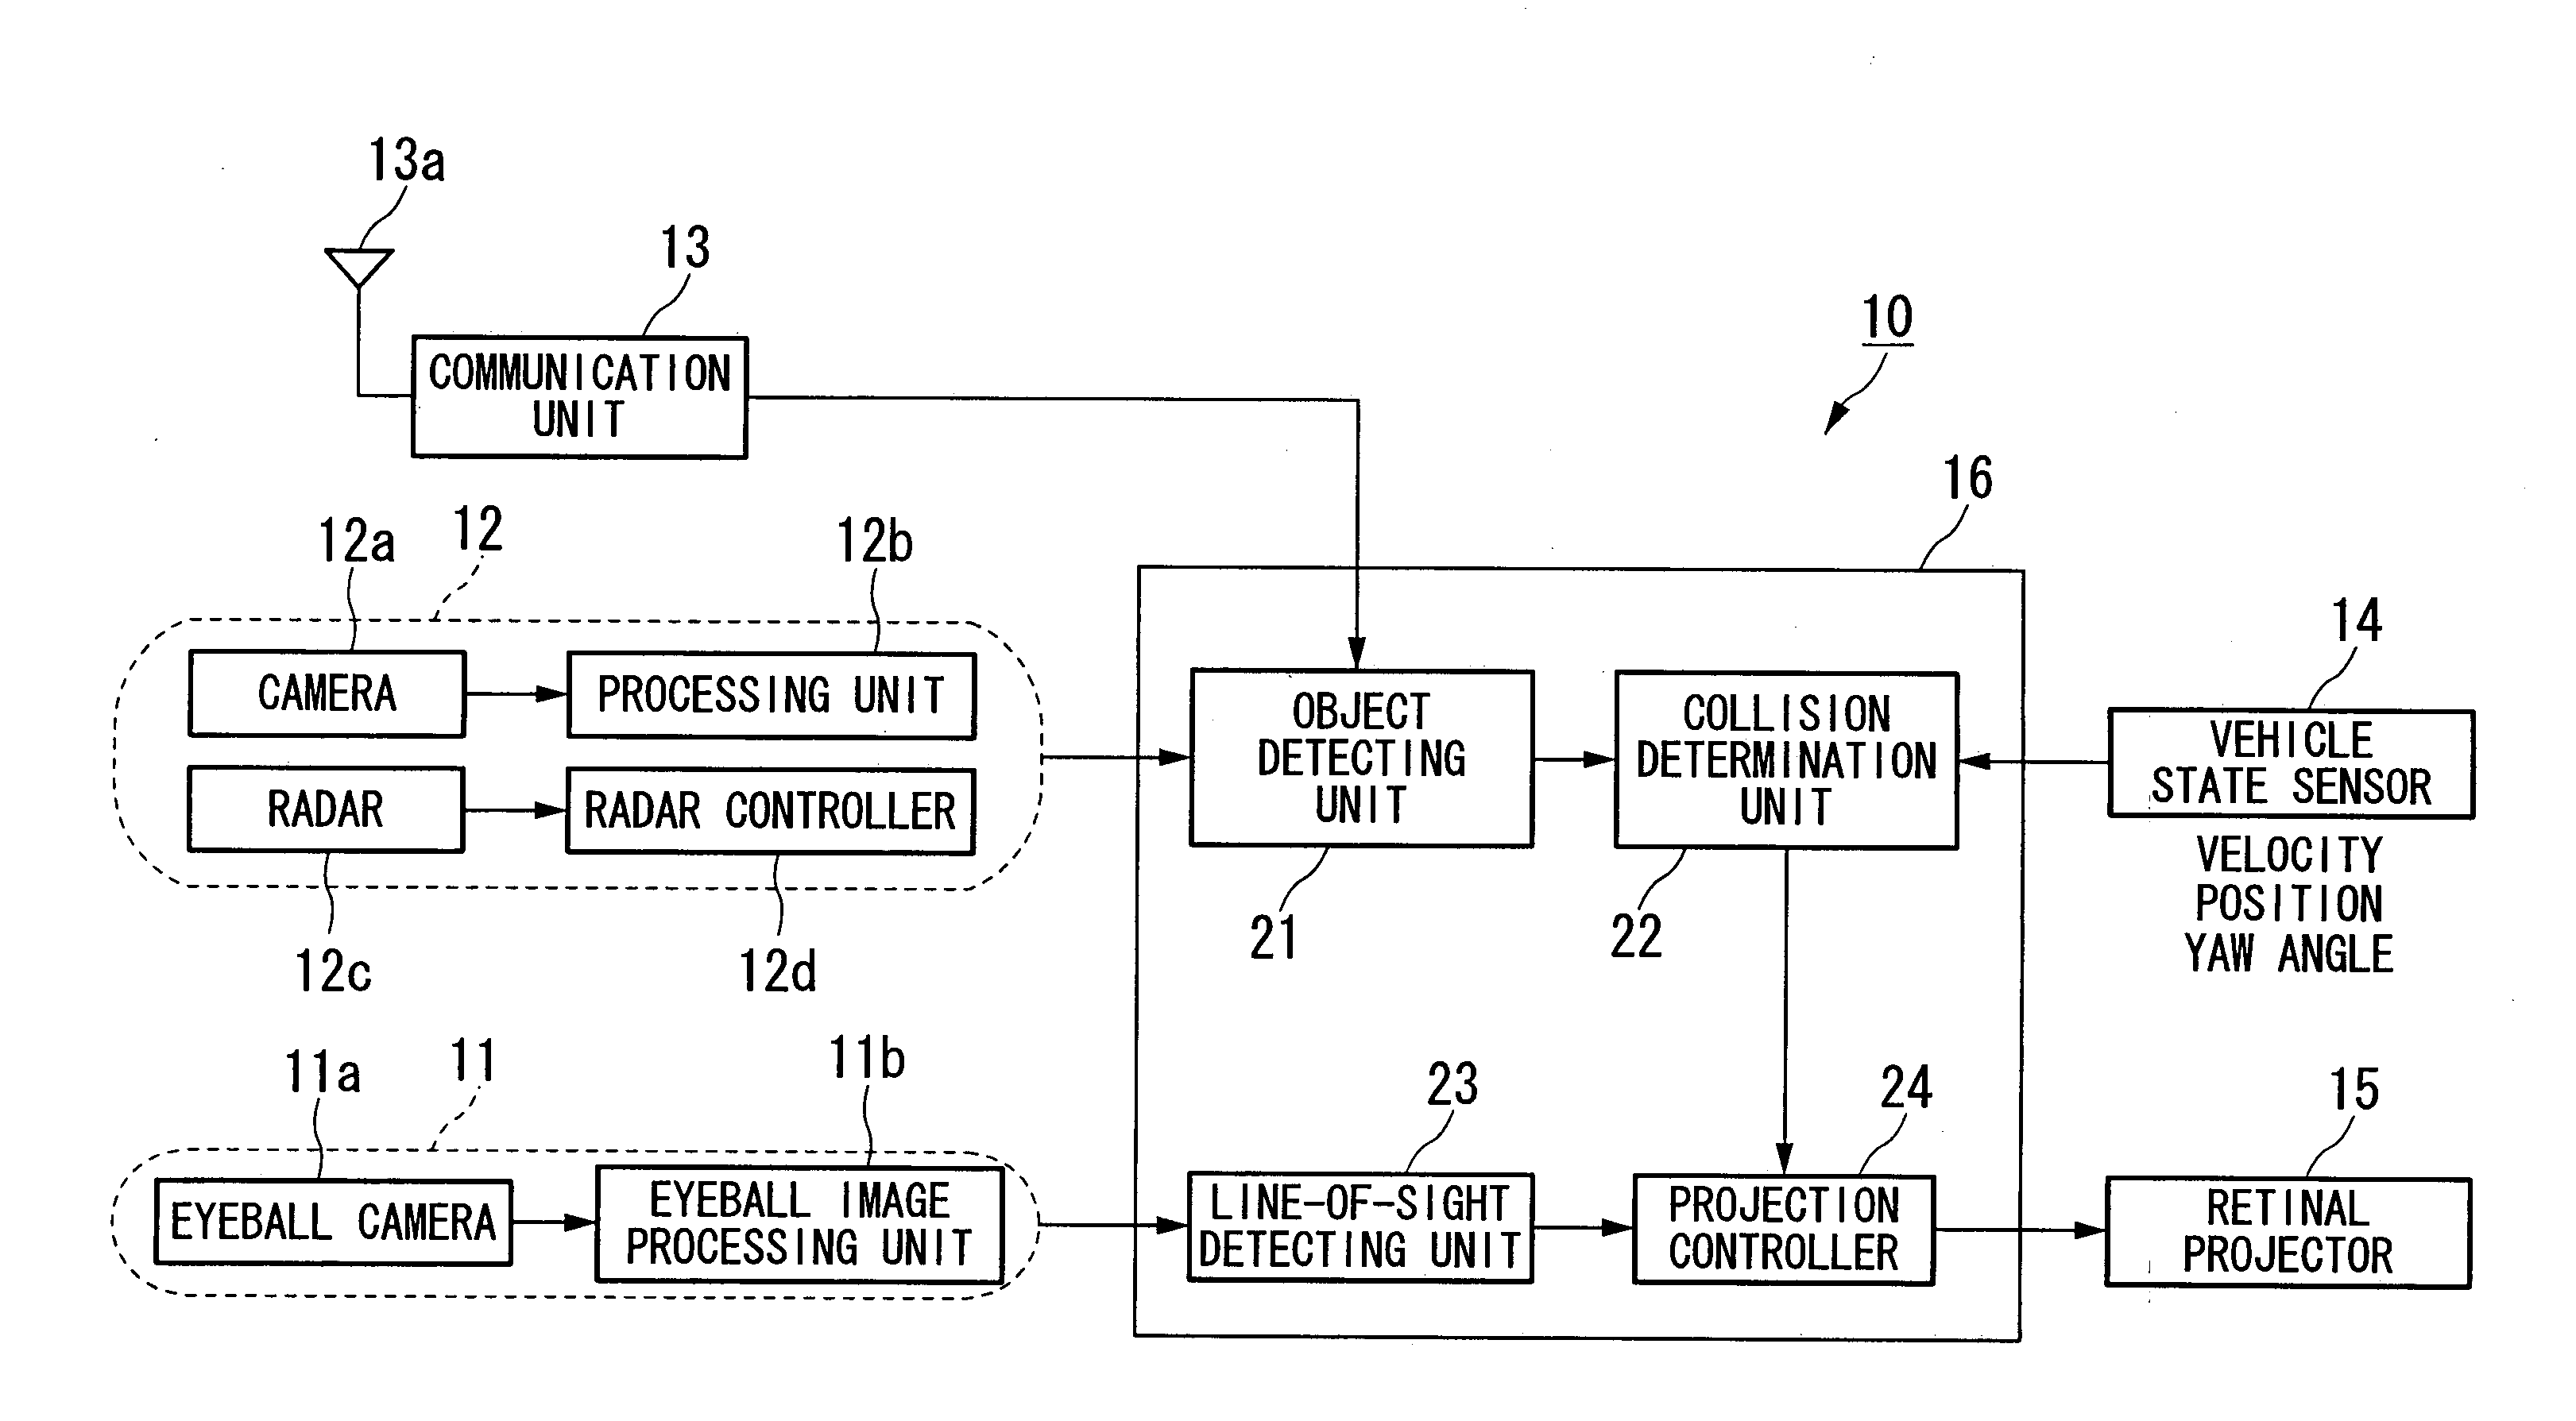 Travel safety apparatus for vehicle